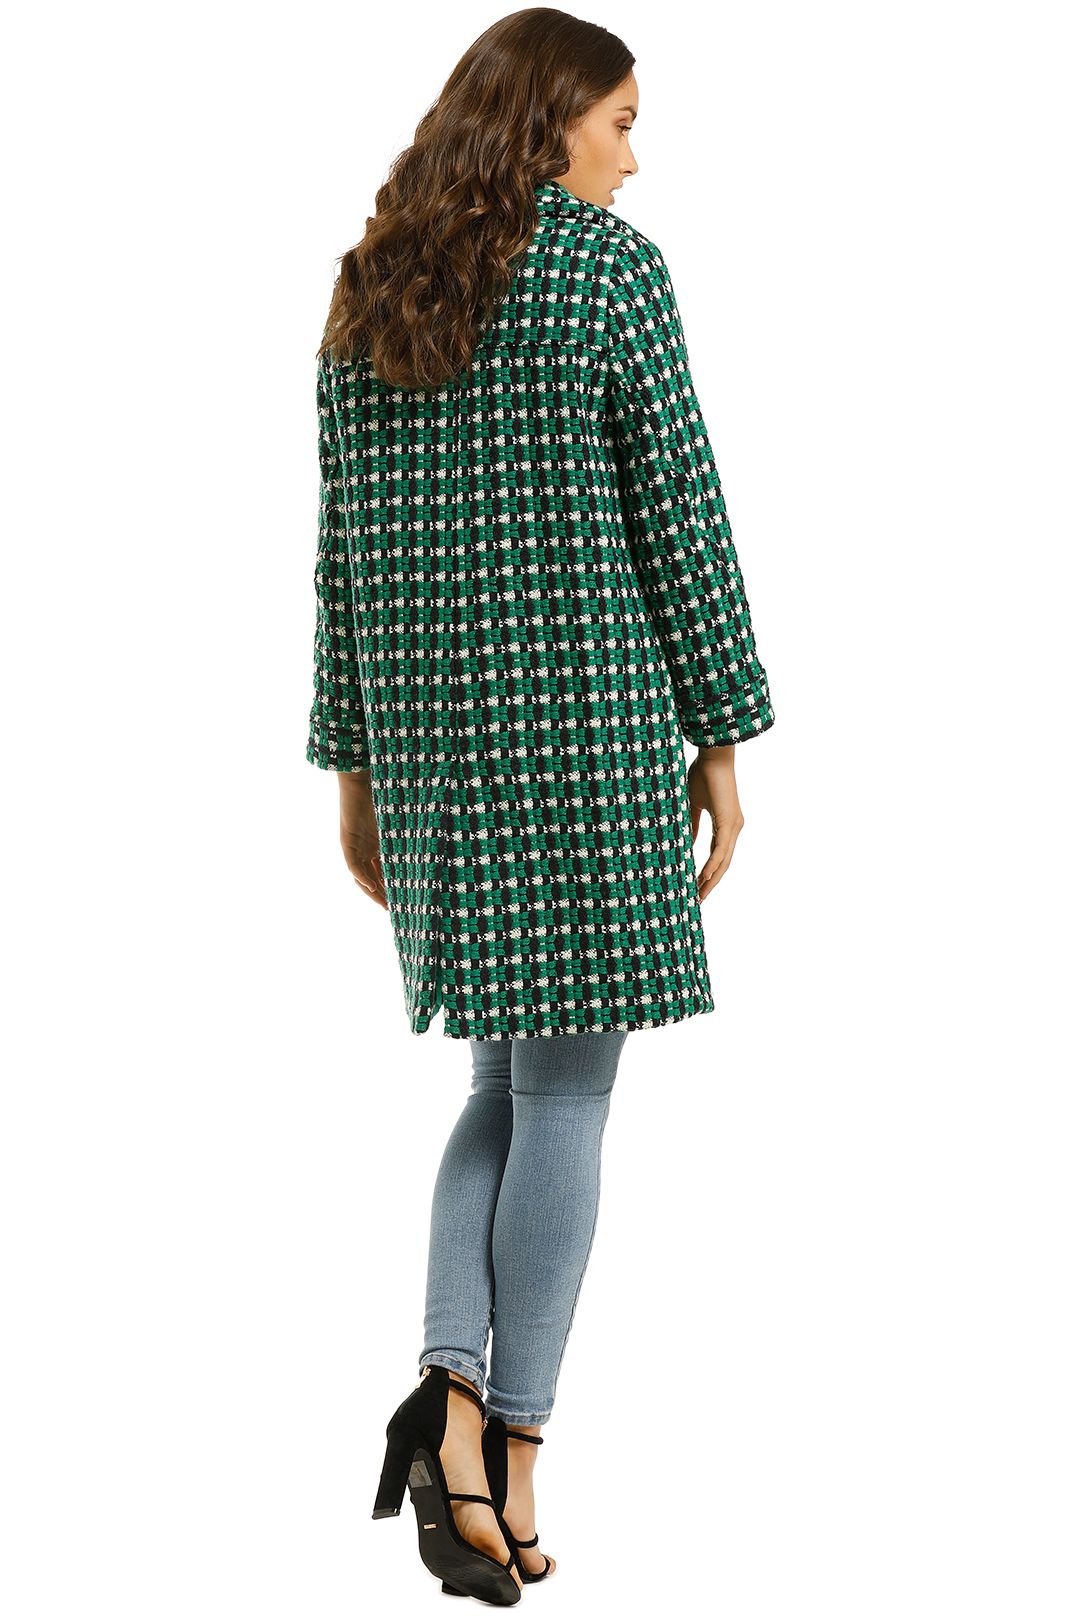 Coop-by-Trelise-Cooper-Rock-The-Coat-Green-Plaid-Back